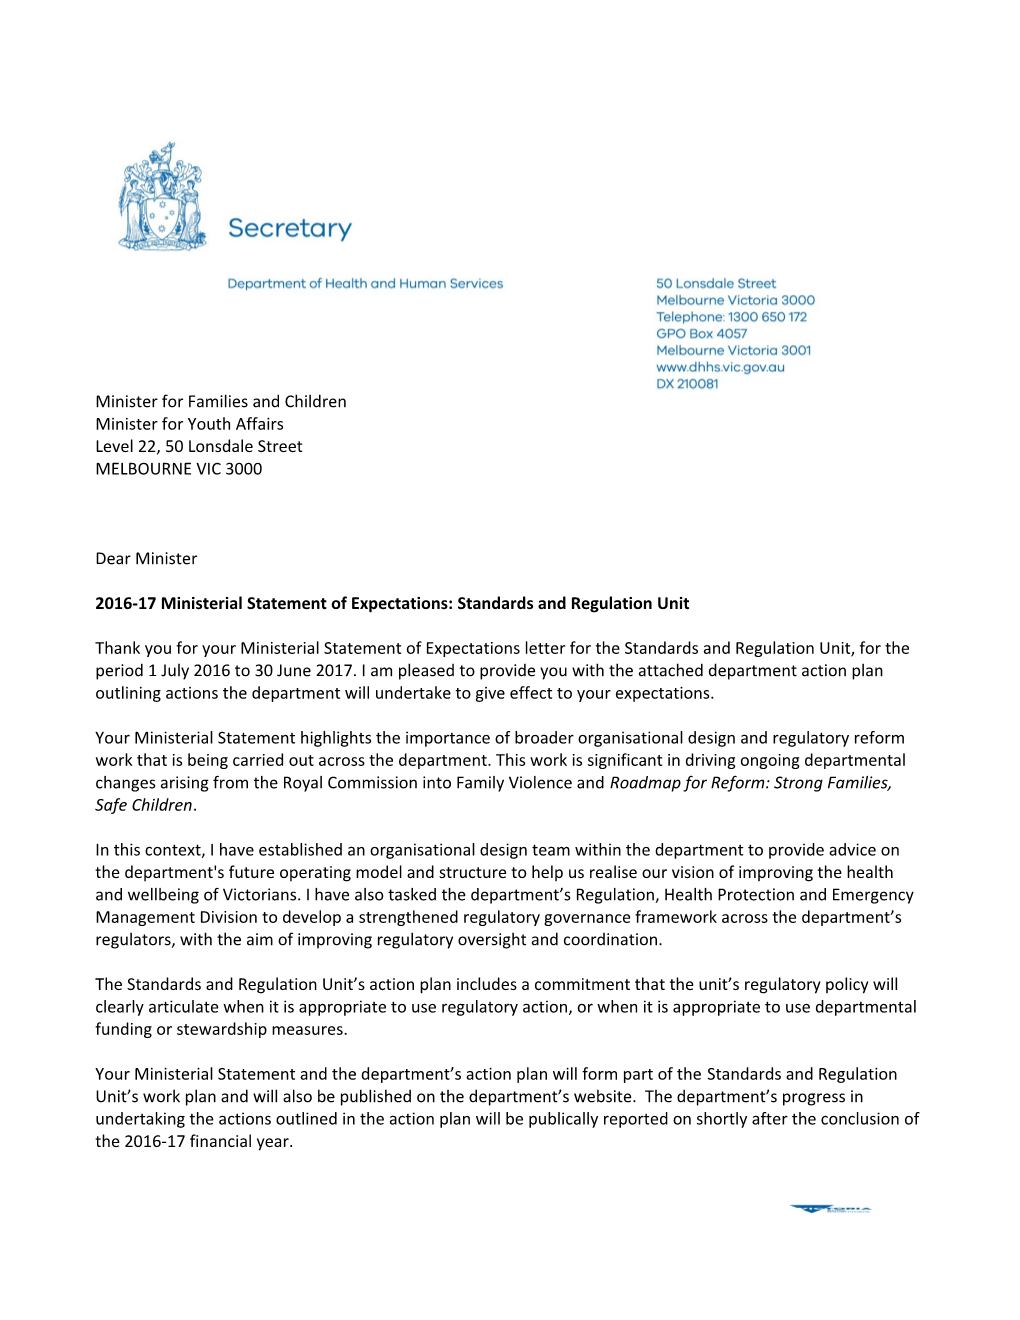 Response to Minister Mikakos from Secretary DHHS